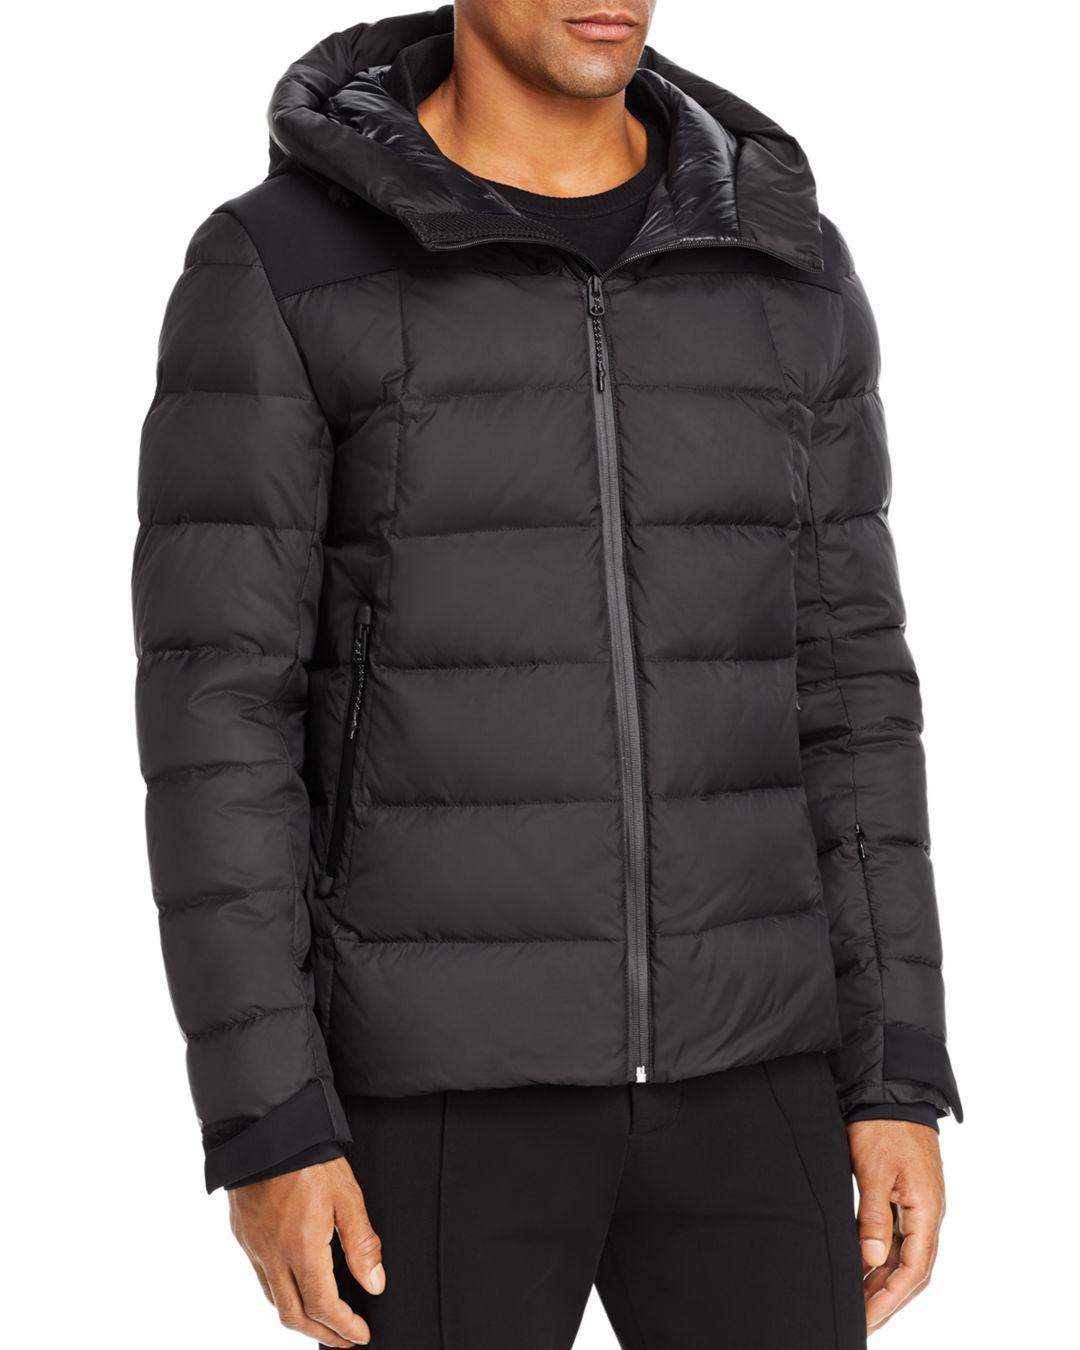 Cole Haan Synthetic Down Jacket in Black for Men - Lyst